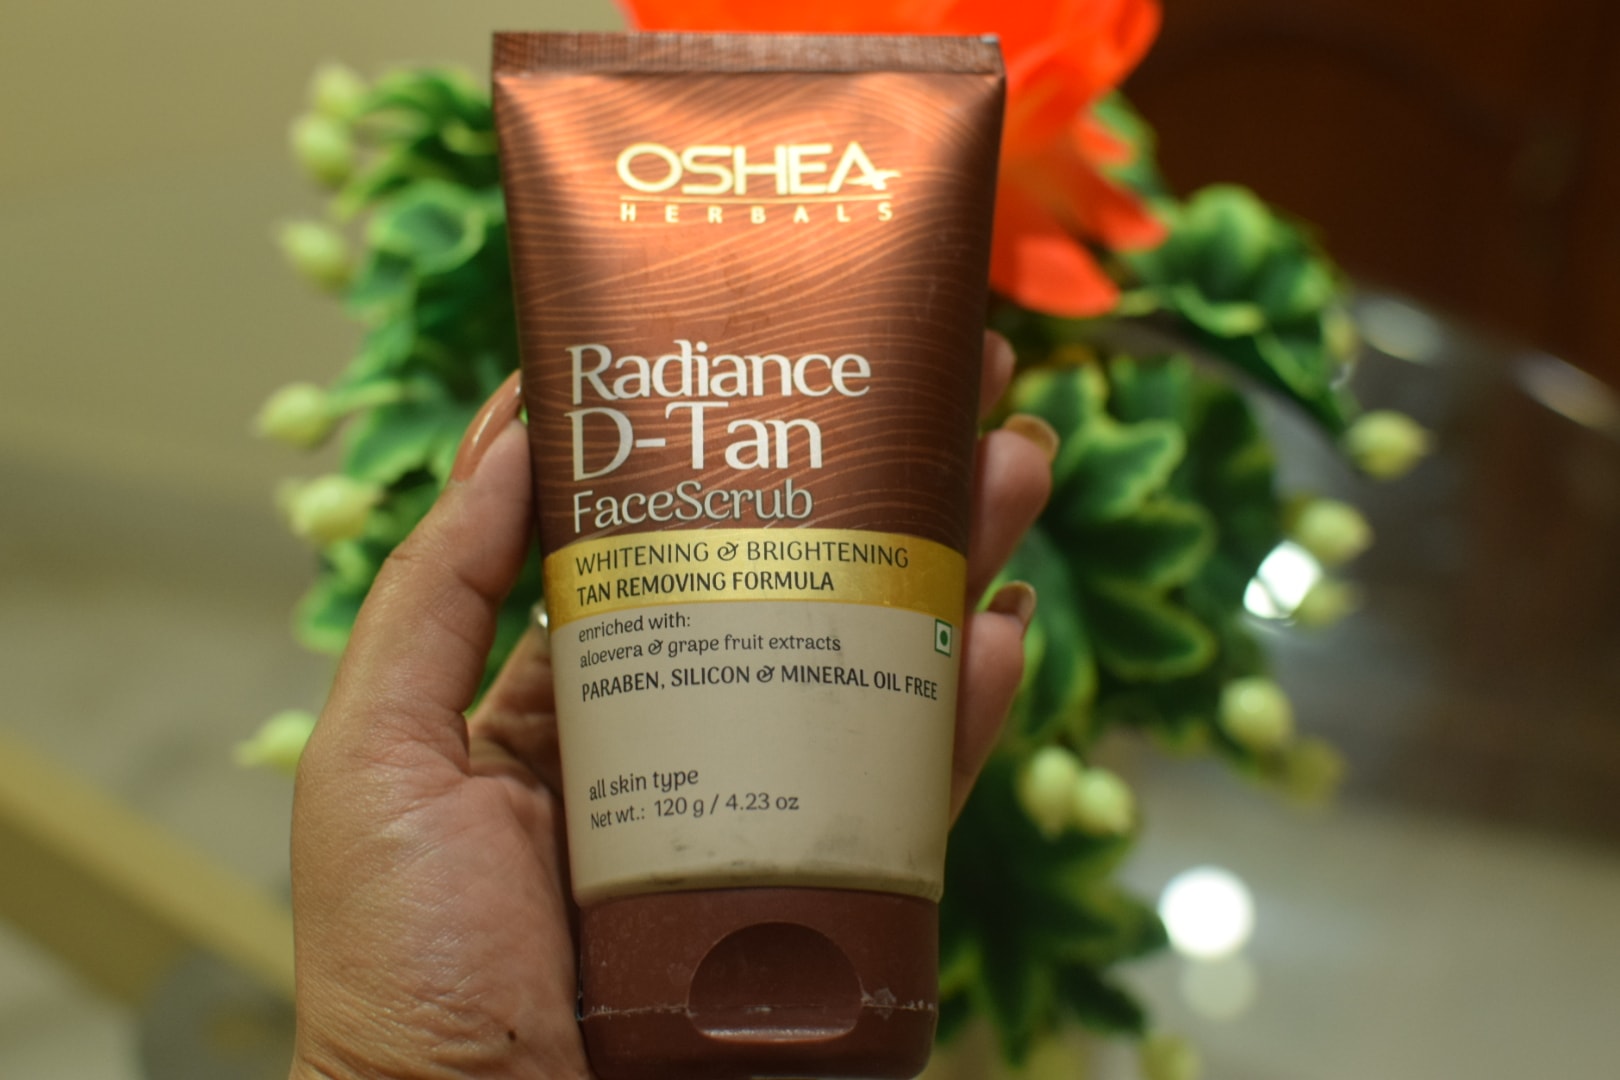 Oshea Herbals Radiance D-TAN Face Scrub Review